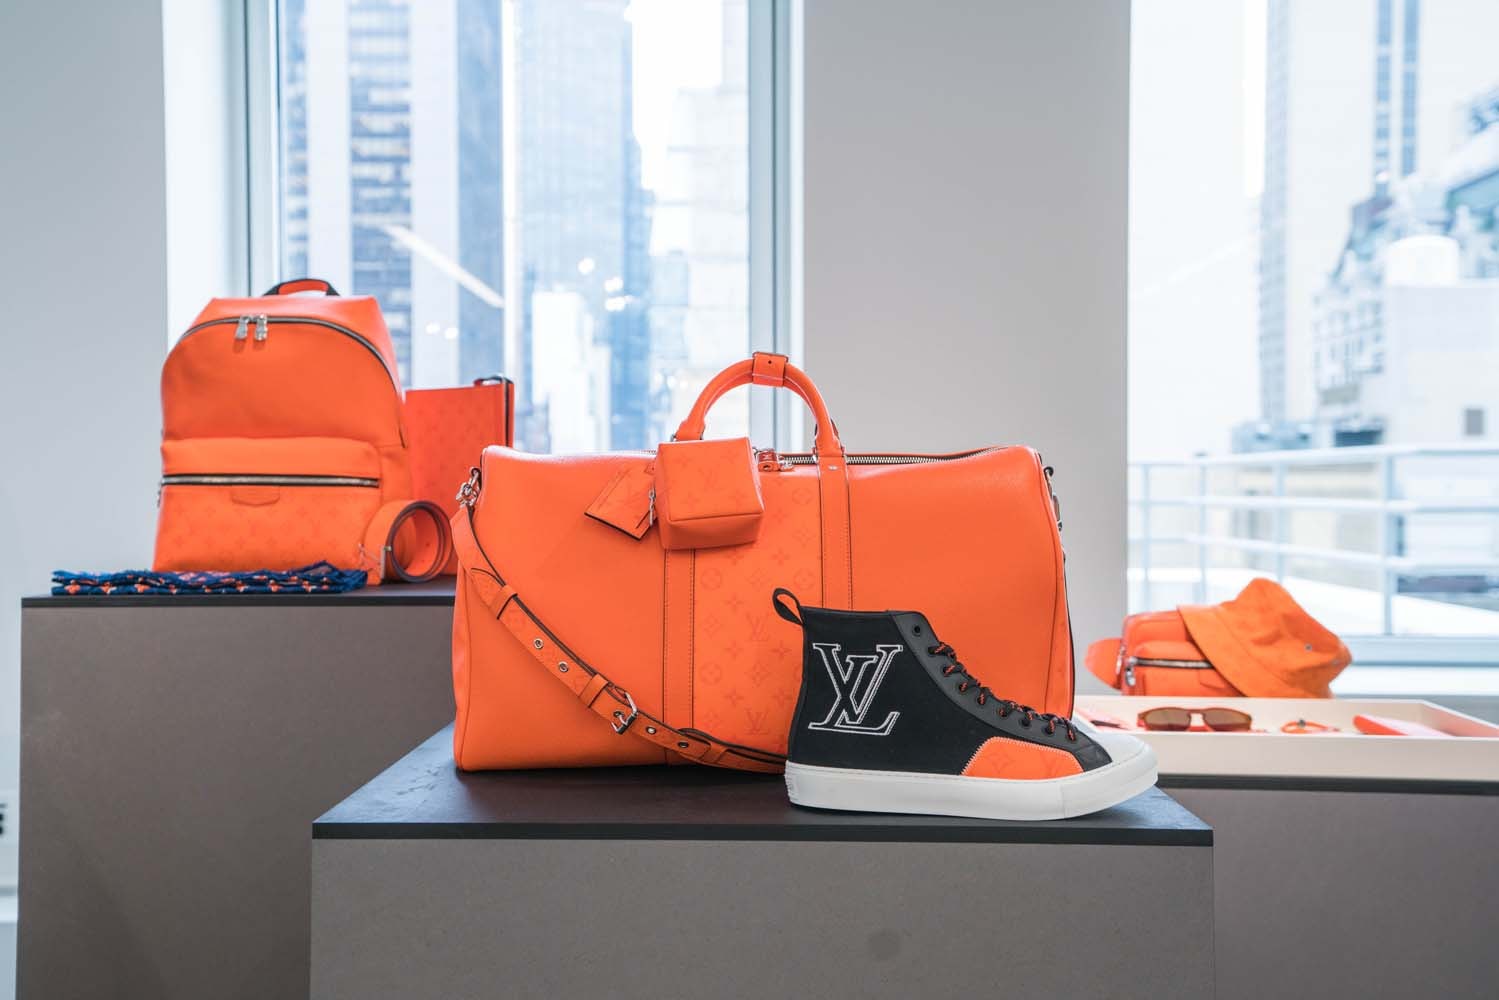 Louis Vuitton's All-New 'Pont 9' Is 2020's 'It' Bag We've Been